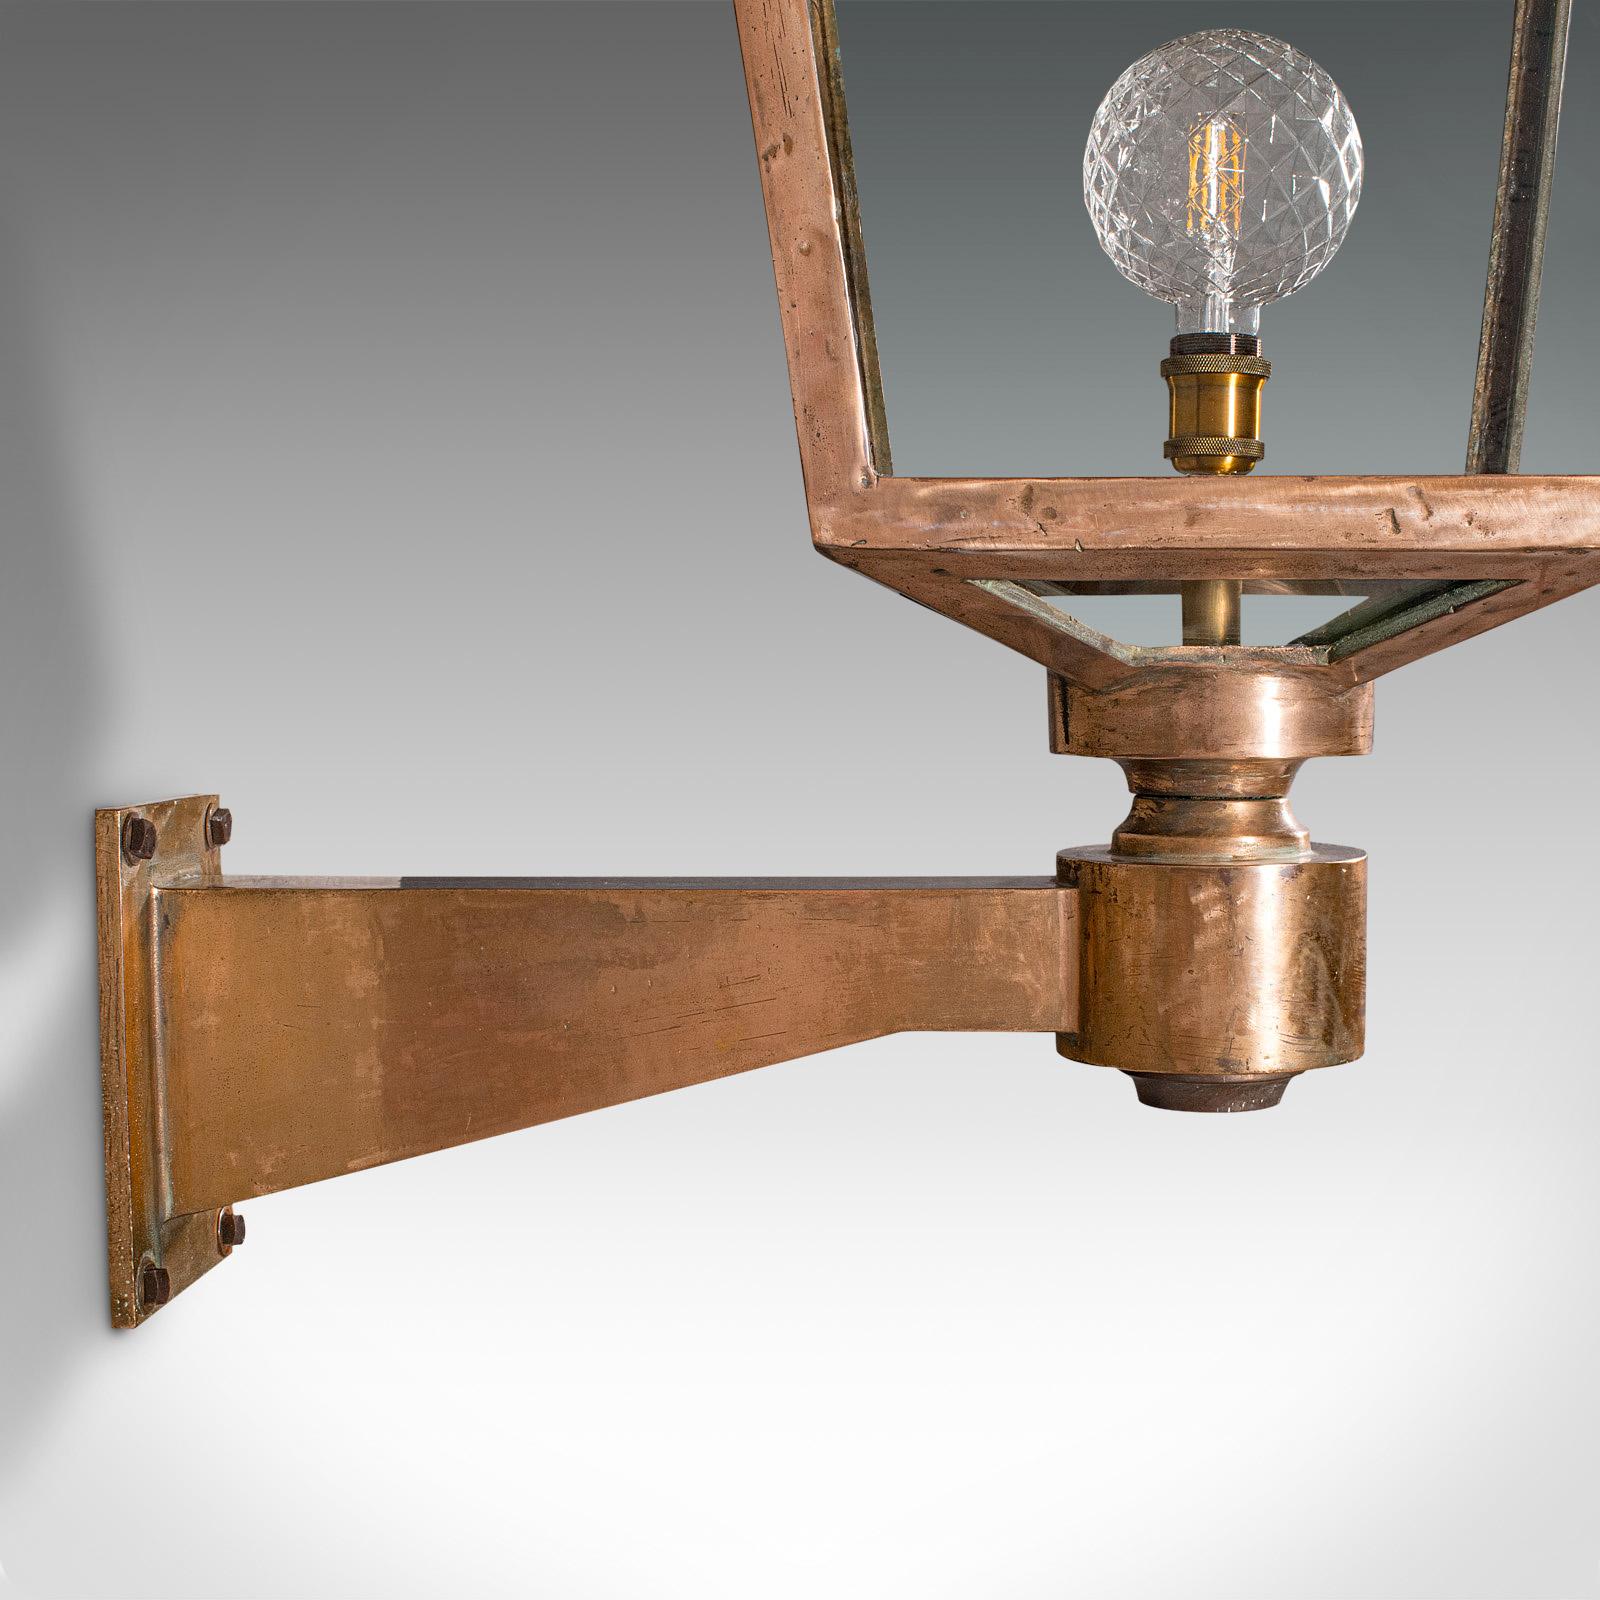 Large Antique Courtyard Light, English, Bronze, Outdoor Lamp, Victorian, C.1870 For Sale 3